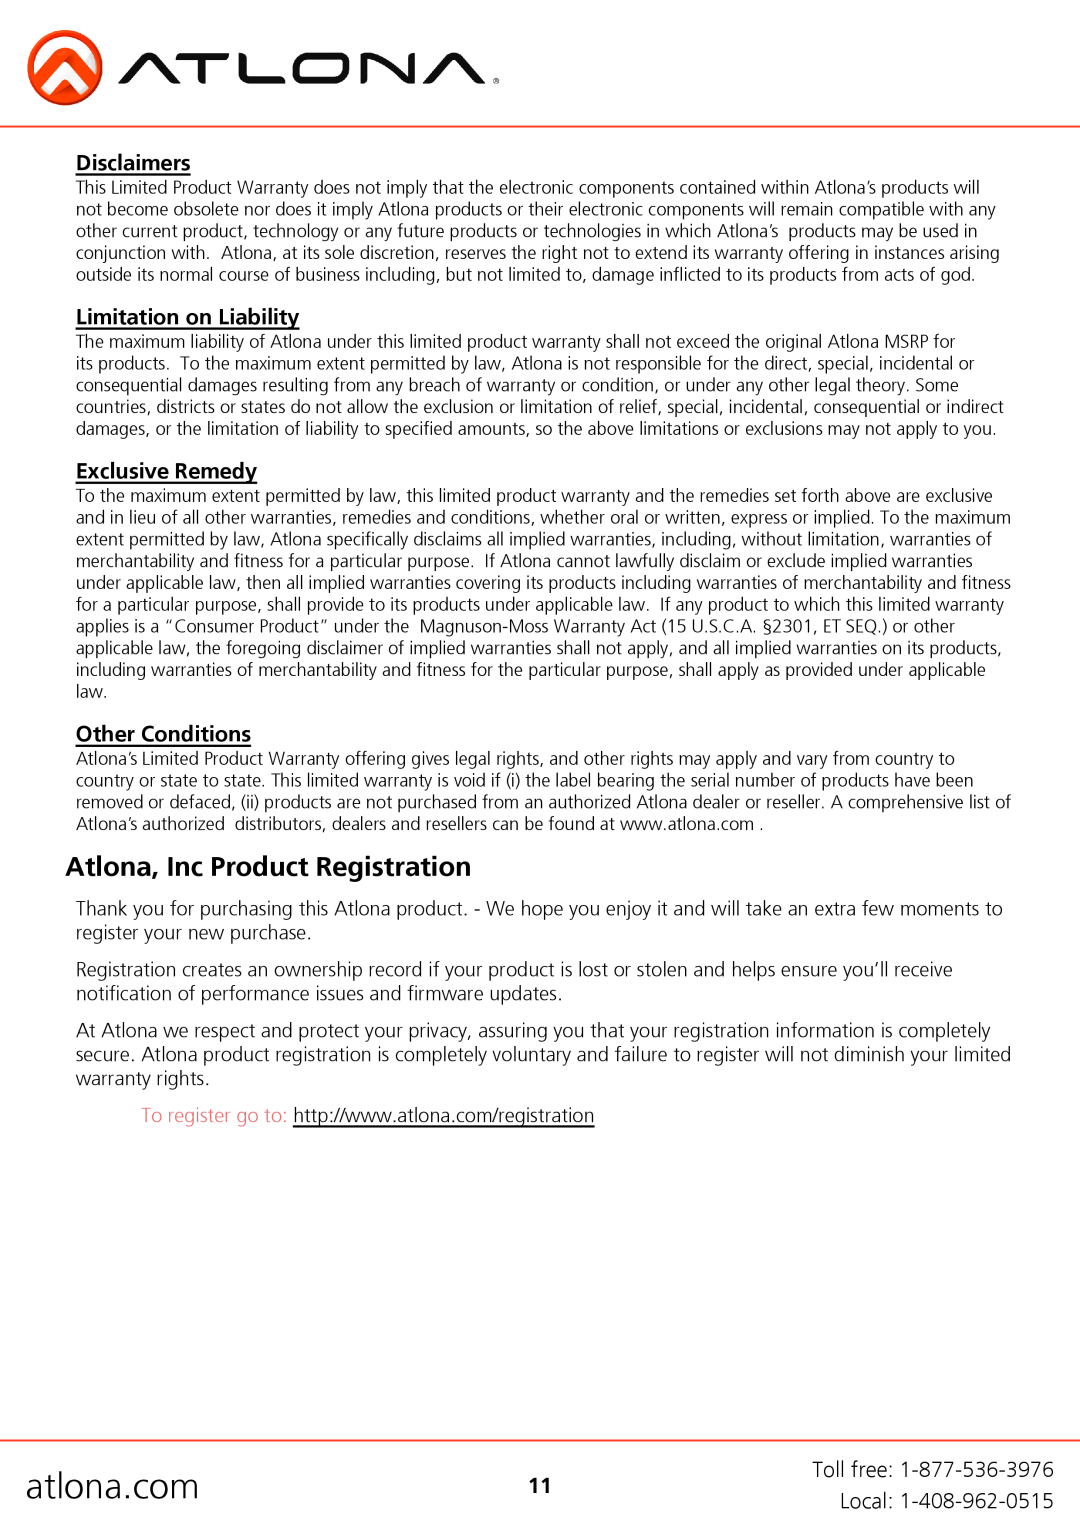 Atlona AT-PS-POCC Atlona, Inc Product Registration, atlona.com, Disclaimers, Limitation on Liability, Exclusive Remedy 